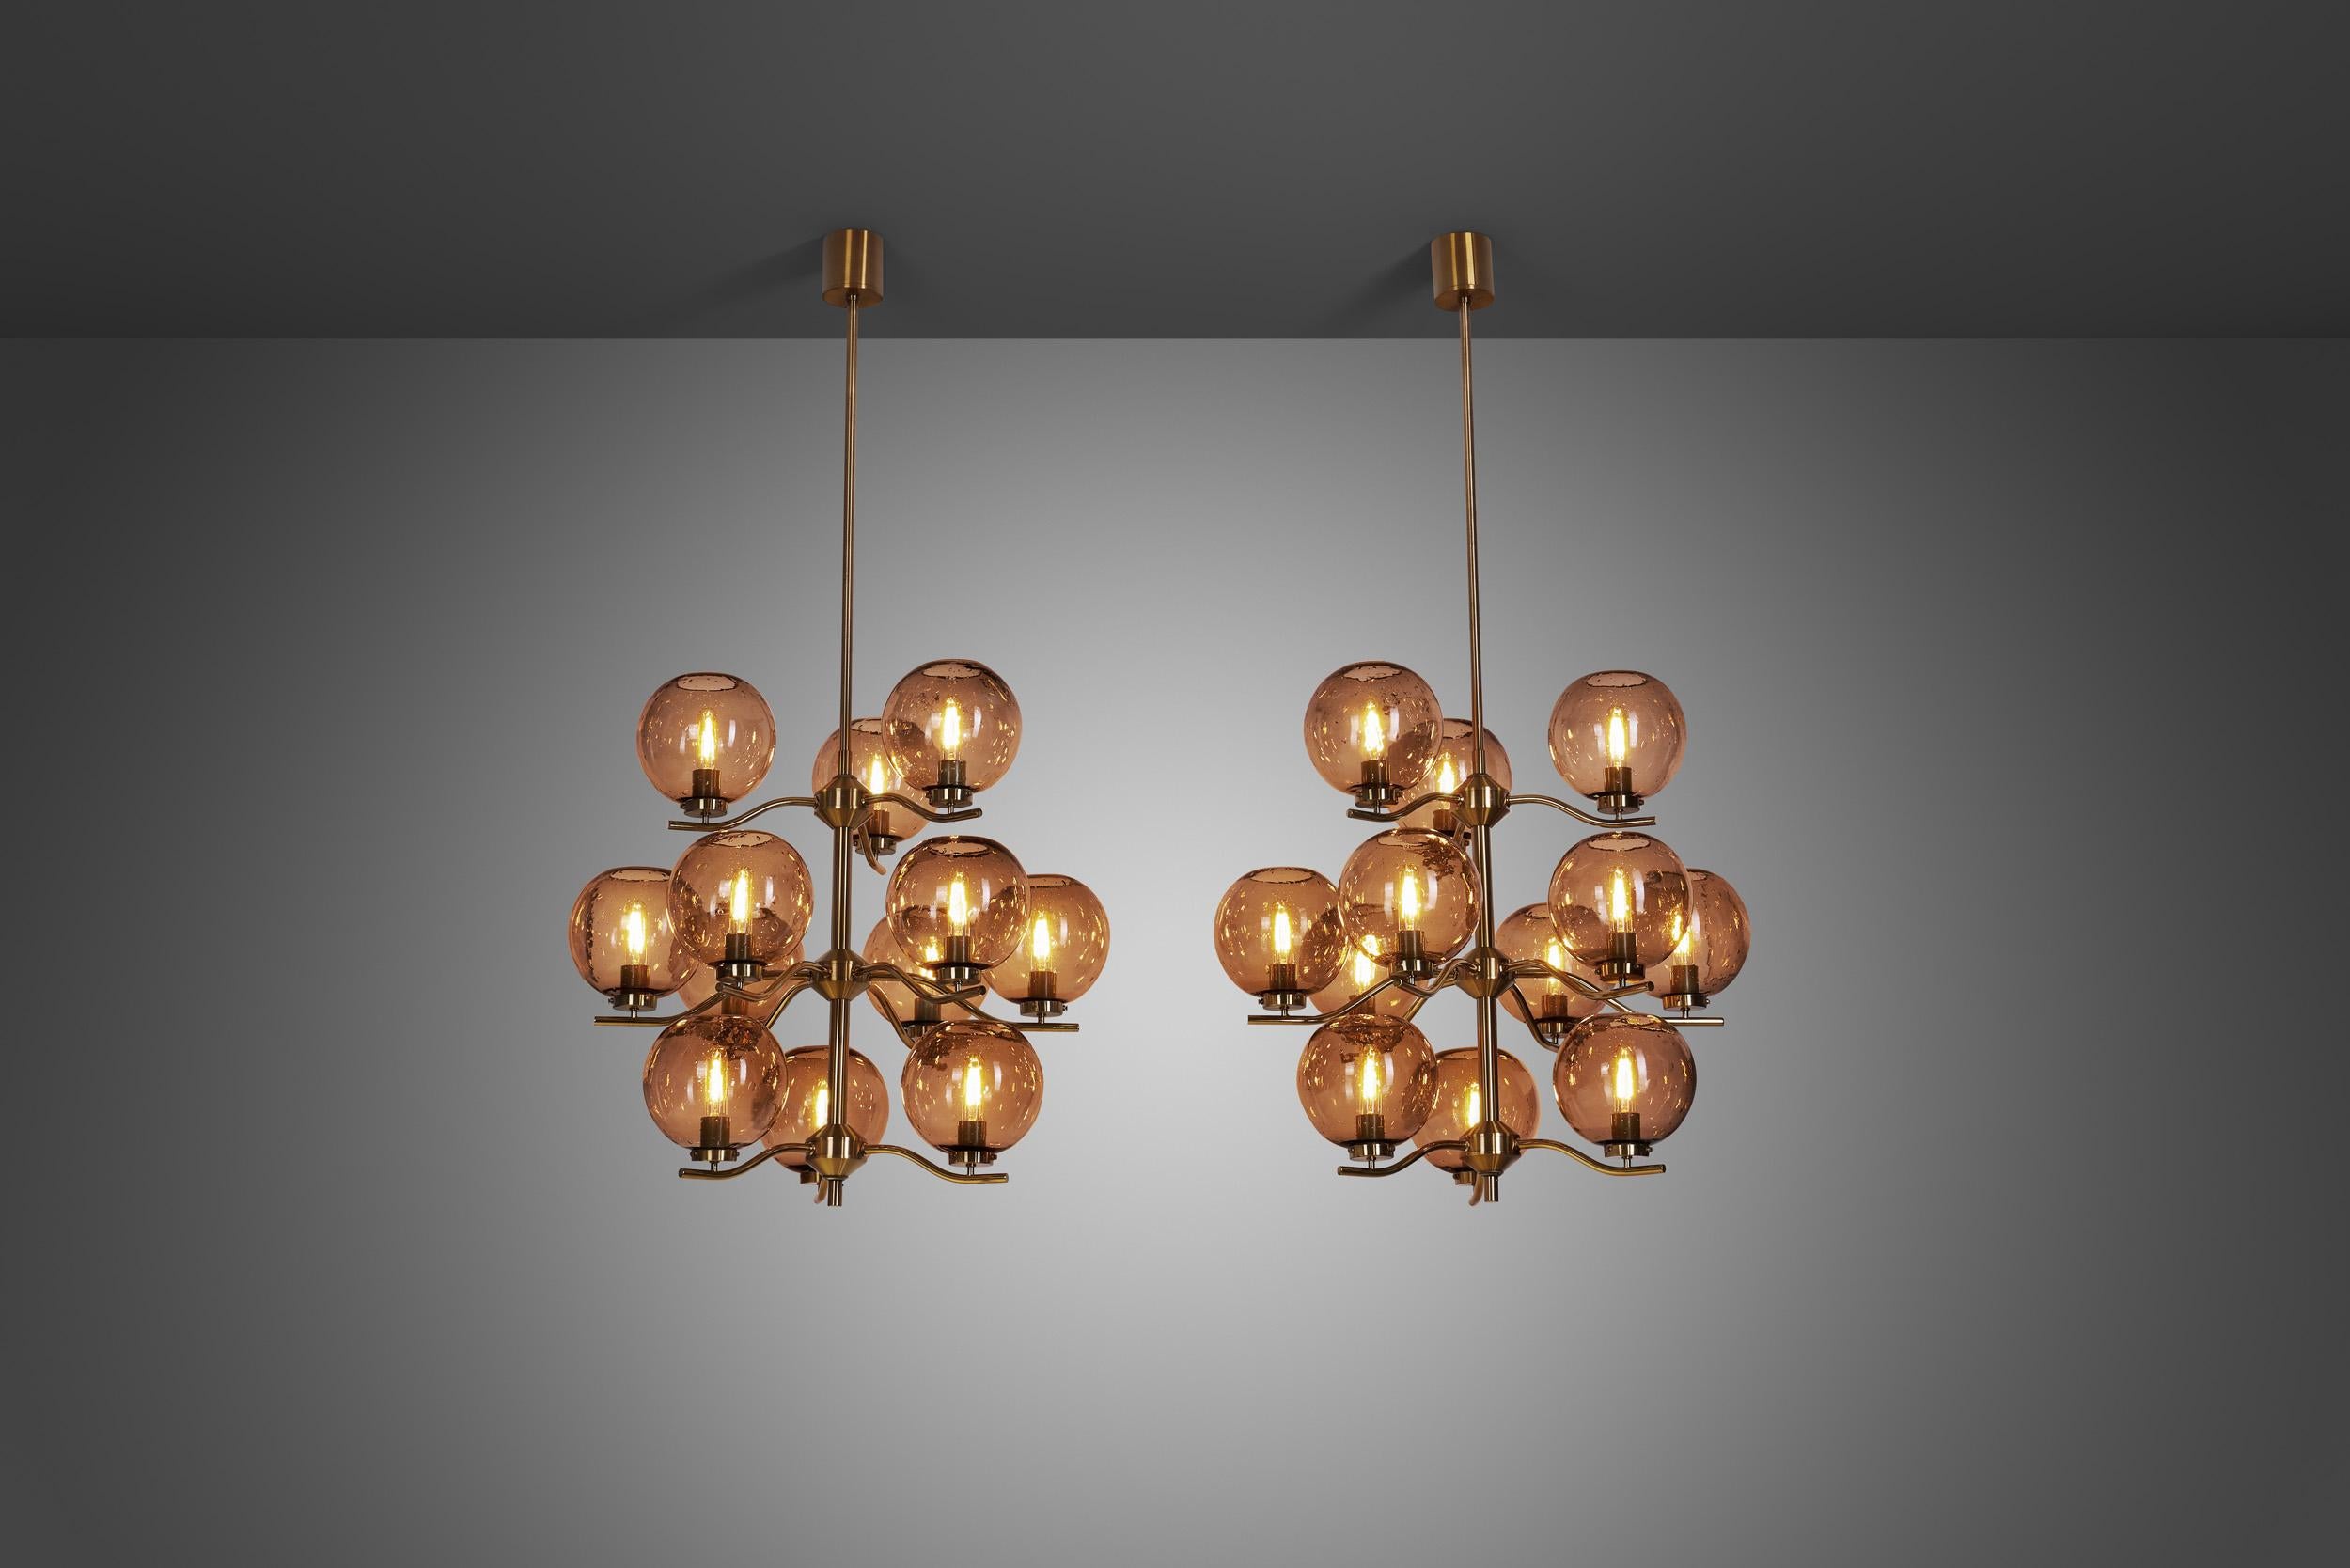 Swedish Holger Johansson Chandeliers with 12 Smoked Glass Shades, Sweden 1970s For Sale